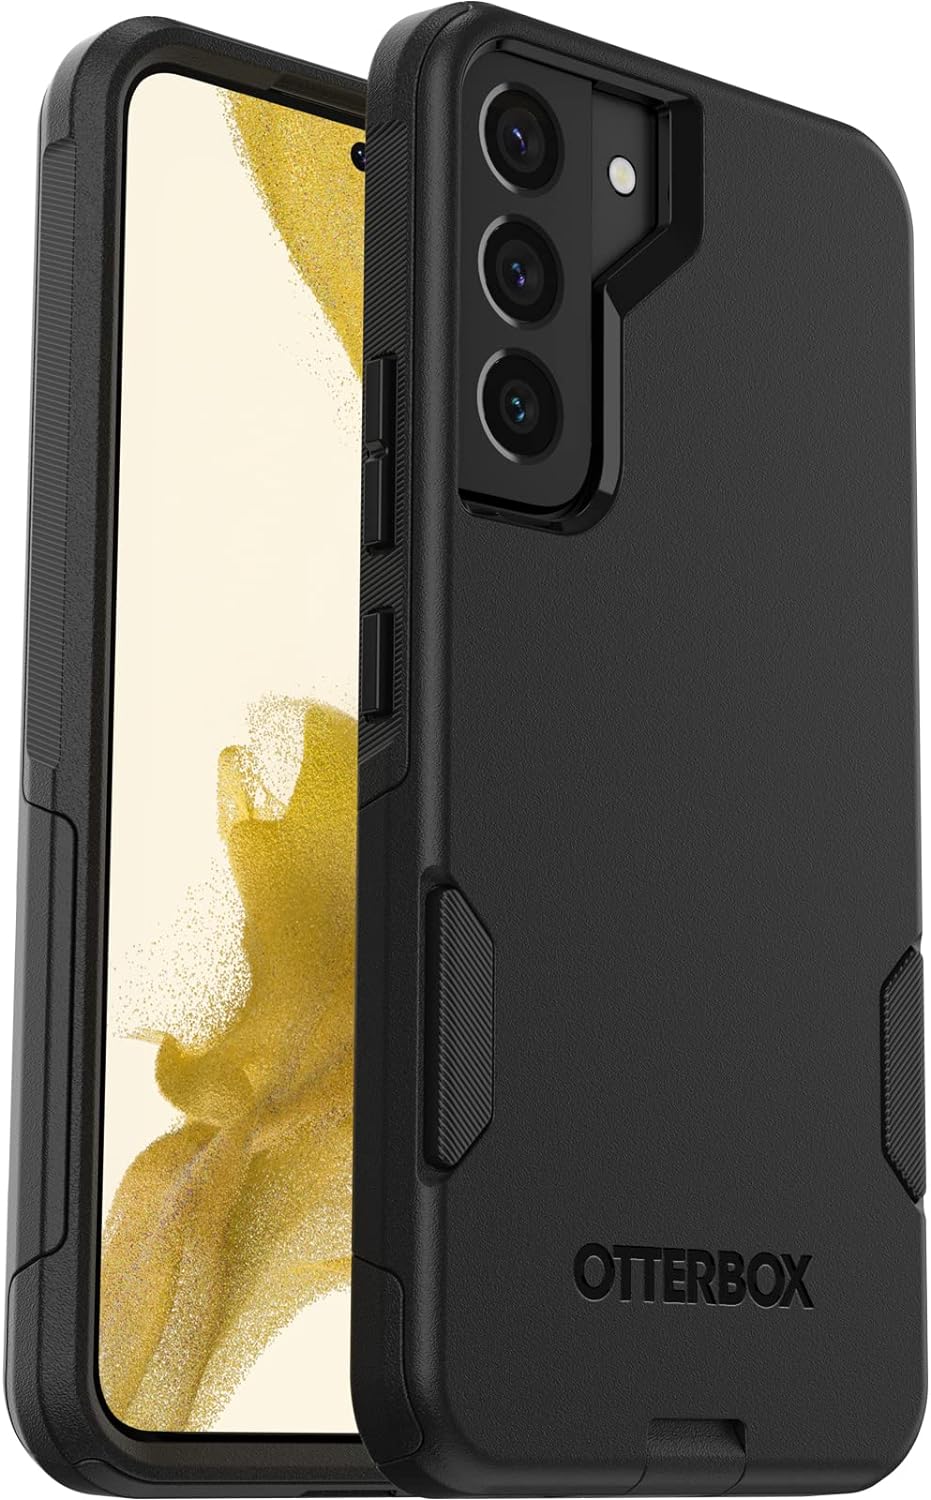 OtterBox COMMUTER SERIES Case for Samsung Galaxy S22 - Black (New)